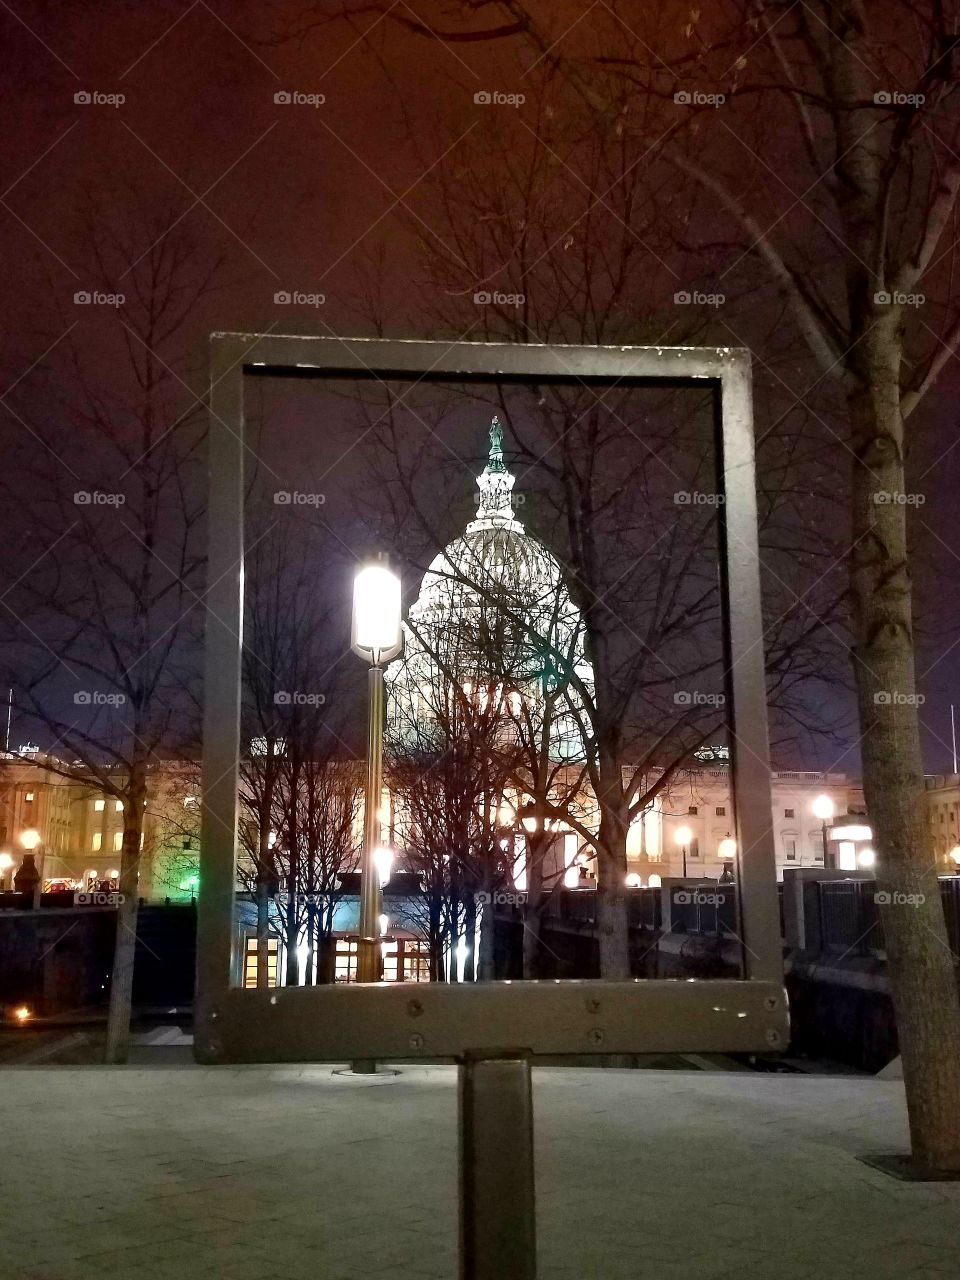 U.S. Capitol Building viewed through a hollowed out street sign.